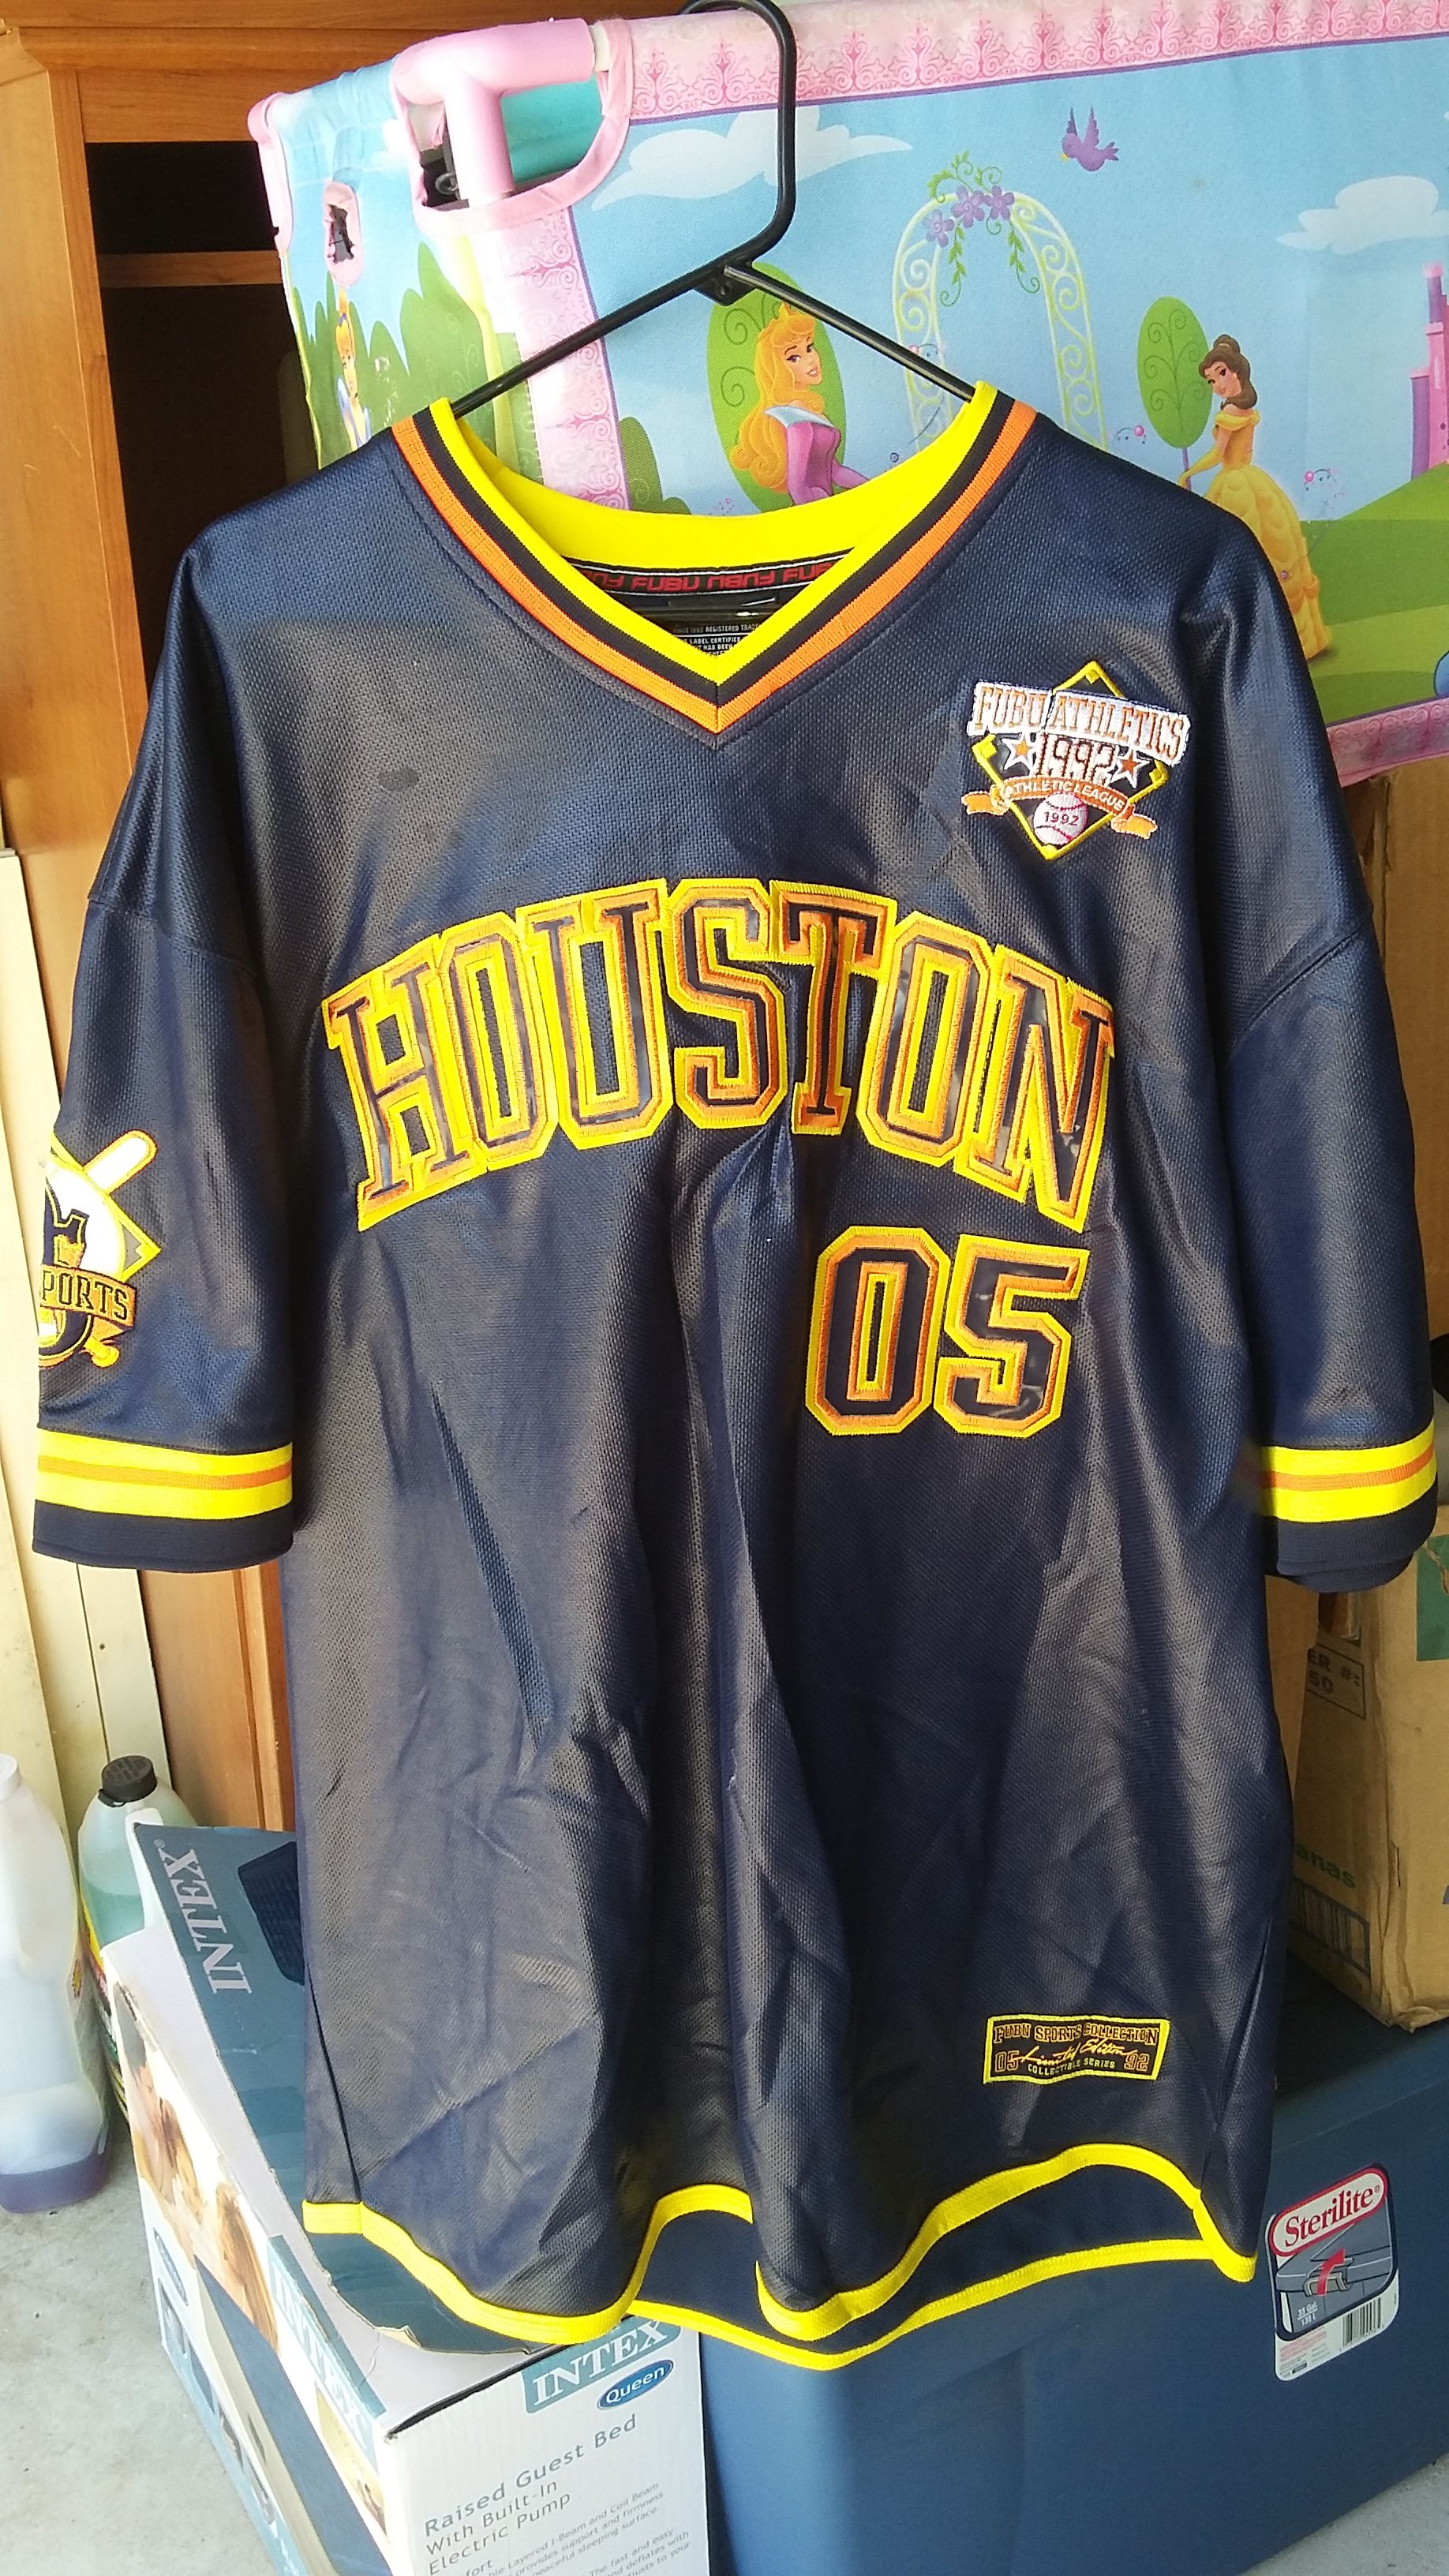 RARE Gold Vintage Astros Jersey - 2XL for Sale in Houston, TX - OfferUp